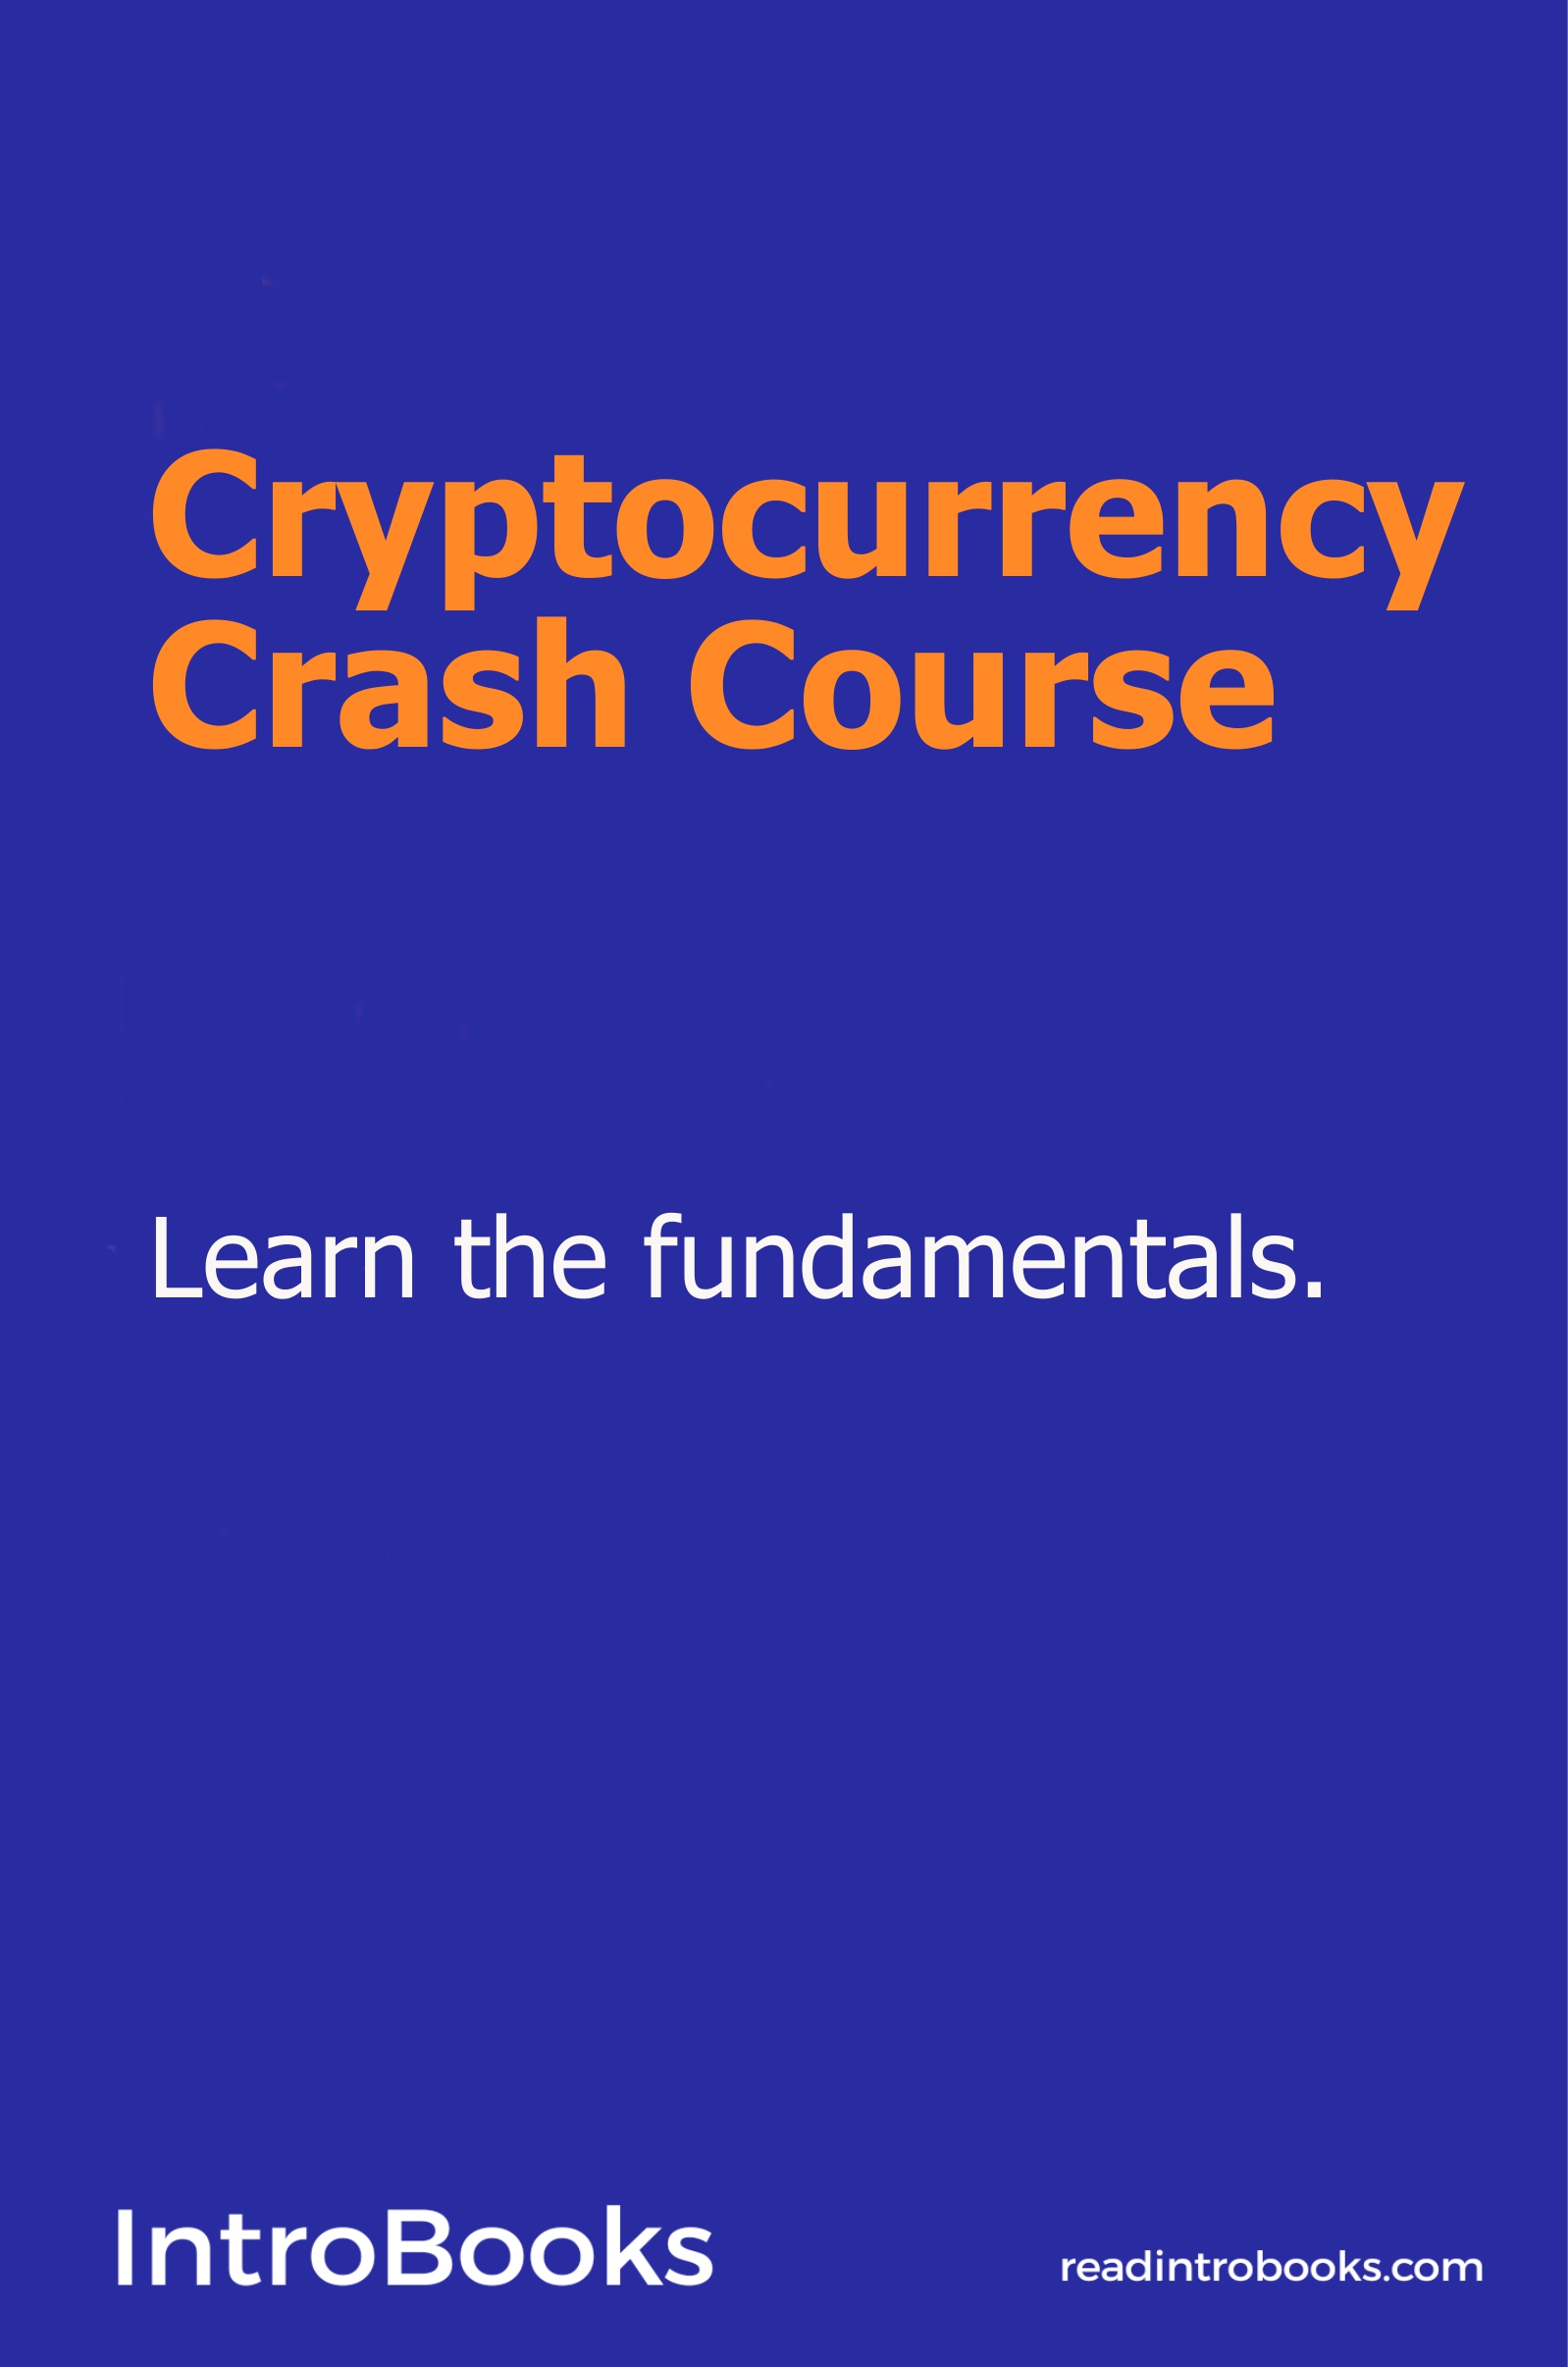 crash course on cryptocurrency